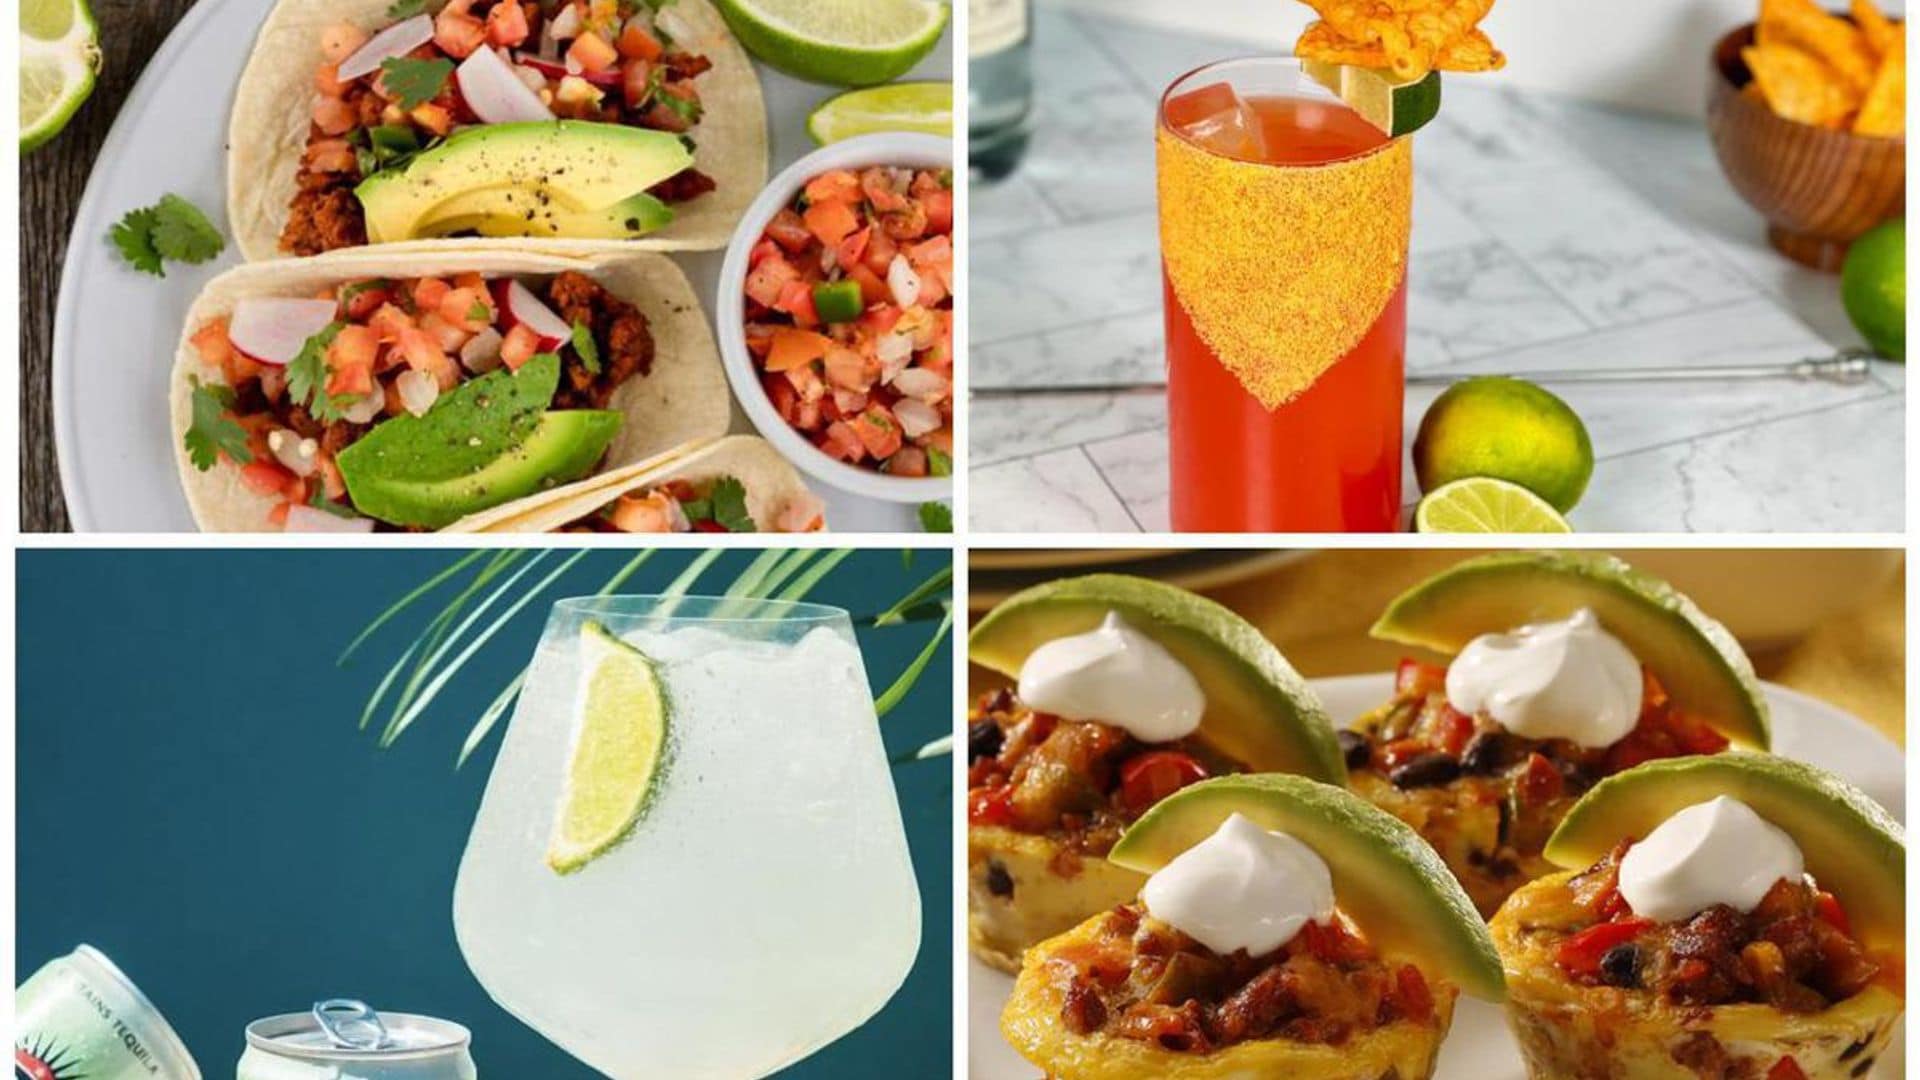 Super Bowl snacks and drinks: Easy and delicious recipes, including vegan options